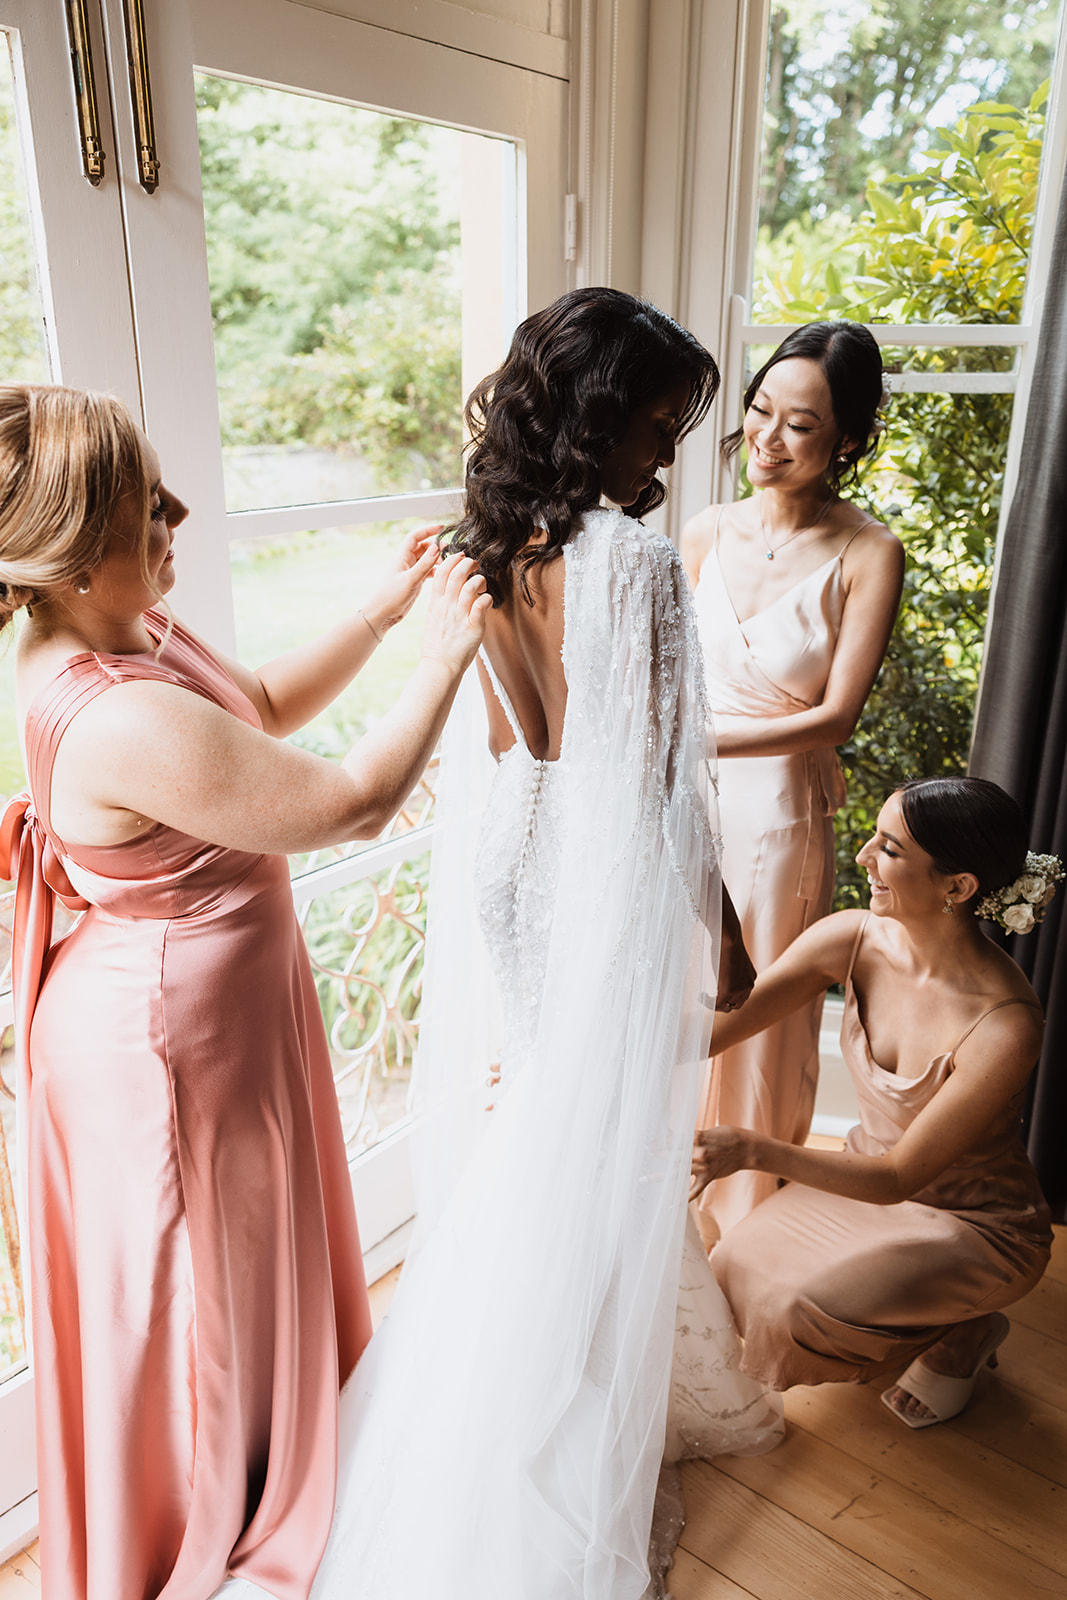 Bride and her bridesmaids fixing the gown at the Wedding in Mona Farm Braidwood, New South Wales